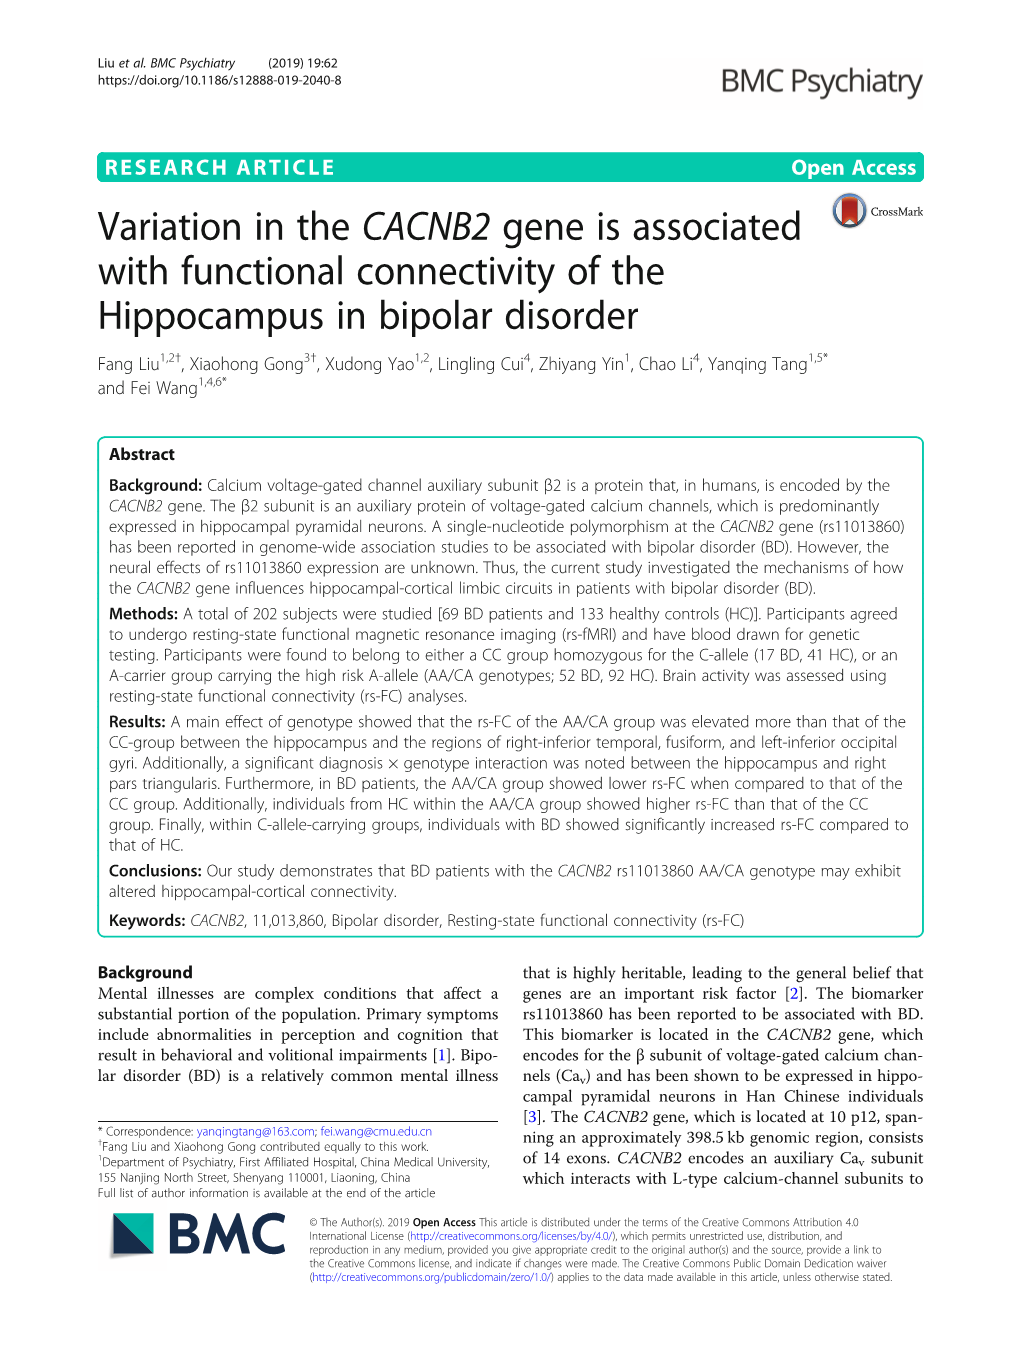 Variation in the CACNB2 Gene Is Associated with Functional